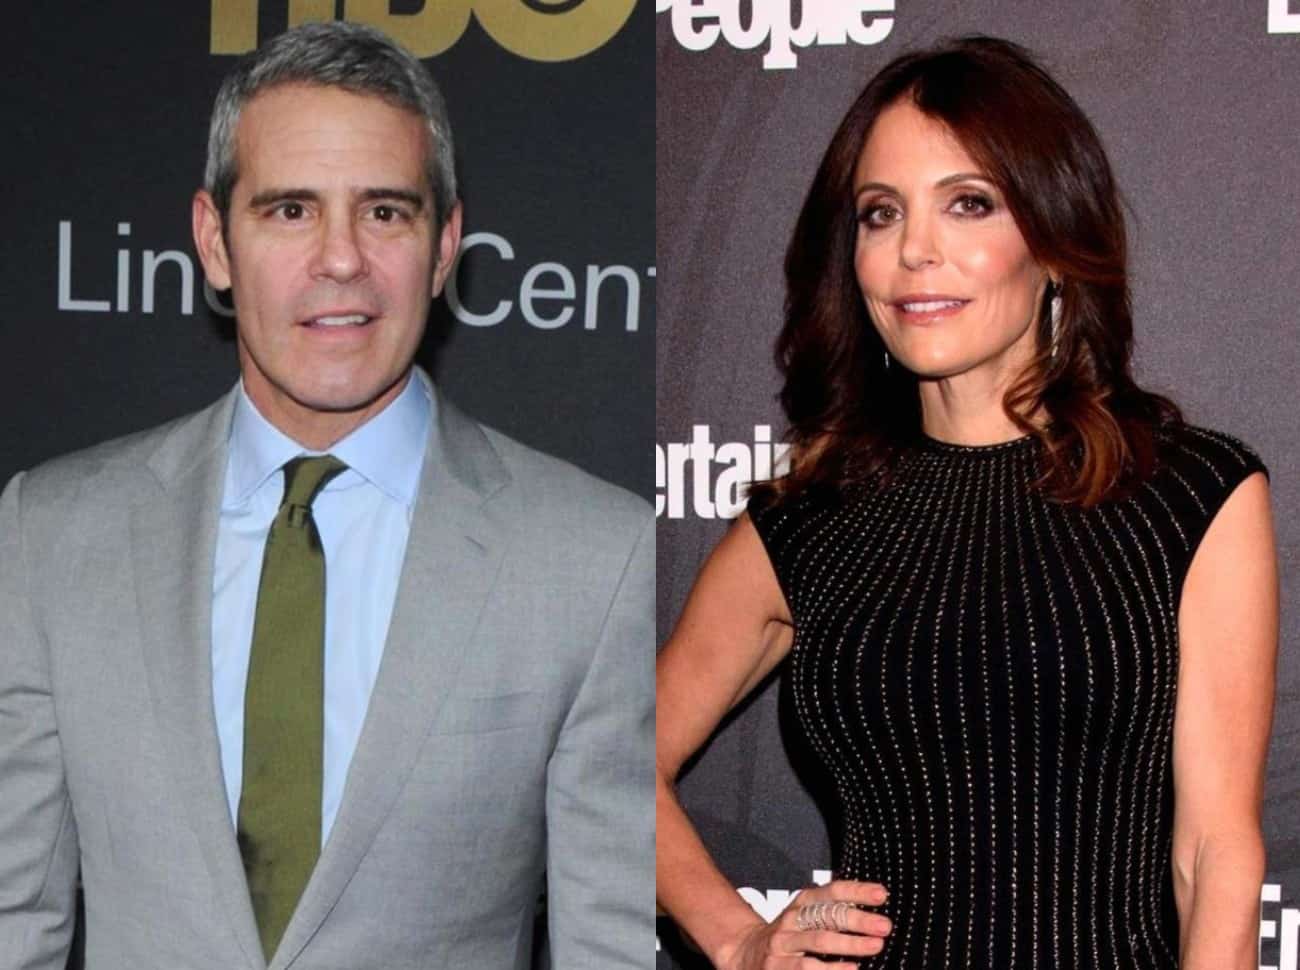 Does Andy Cohen Feel "Betrayed" After Bethenny Frankel Quit RHONY Over Alleged Outrageous Salary Demands? Source Claims Andy Thinks Her 'Ego Is Out of Control'